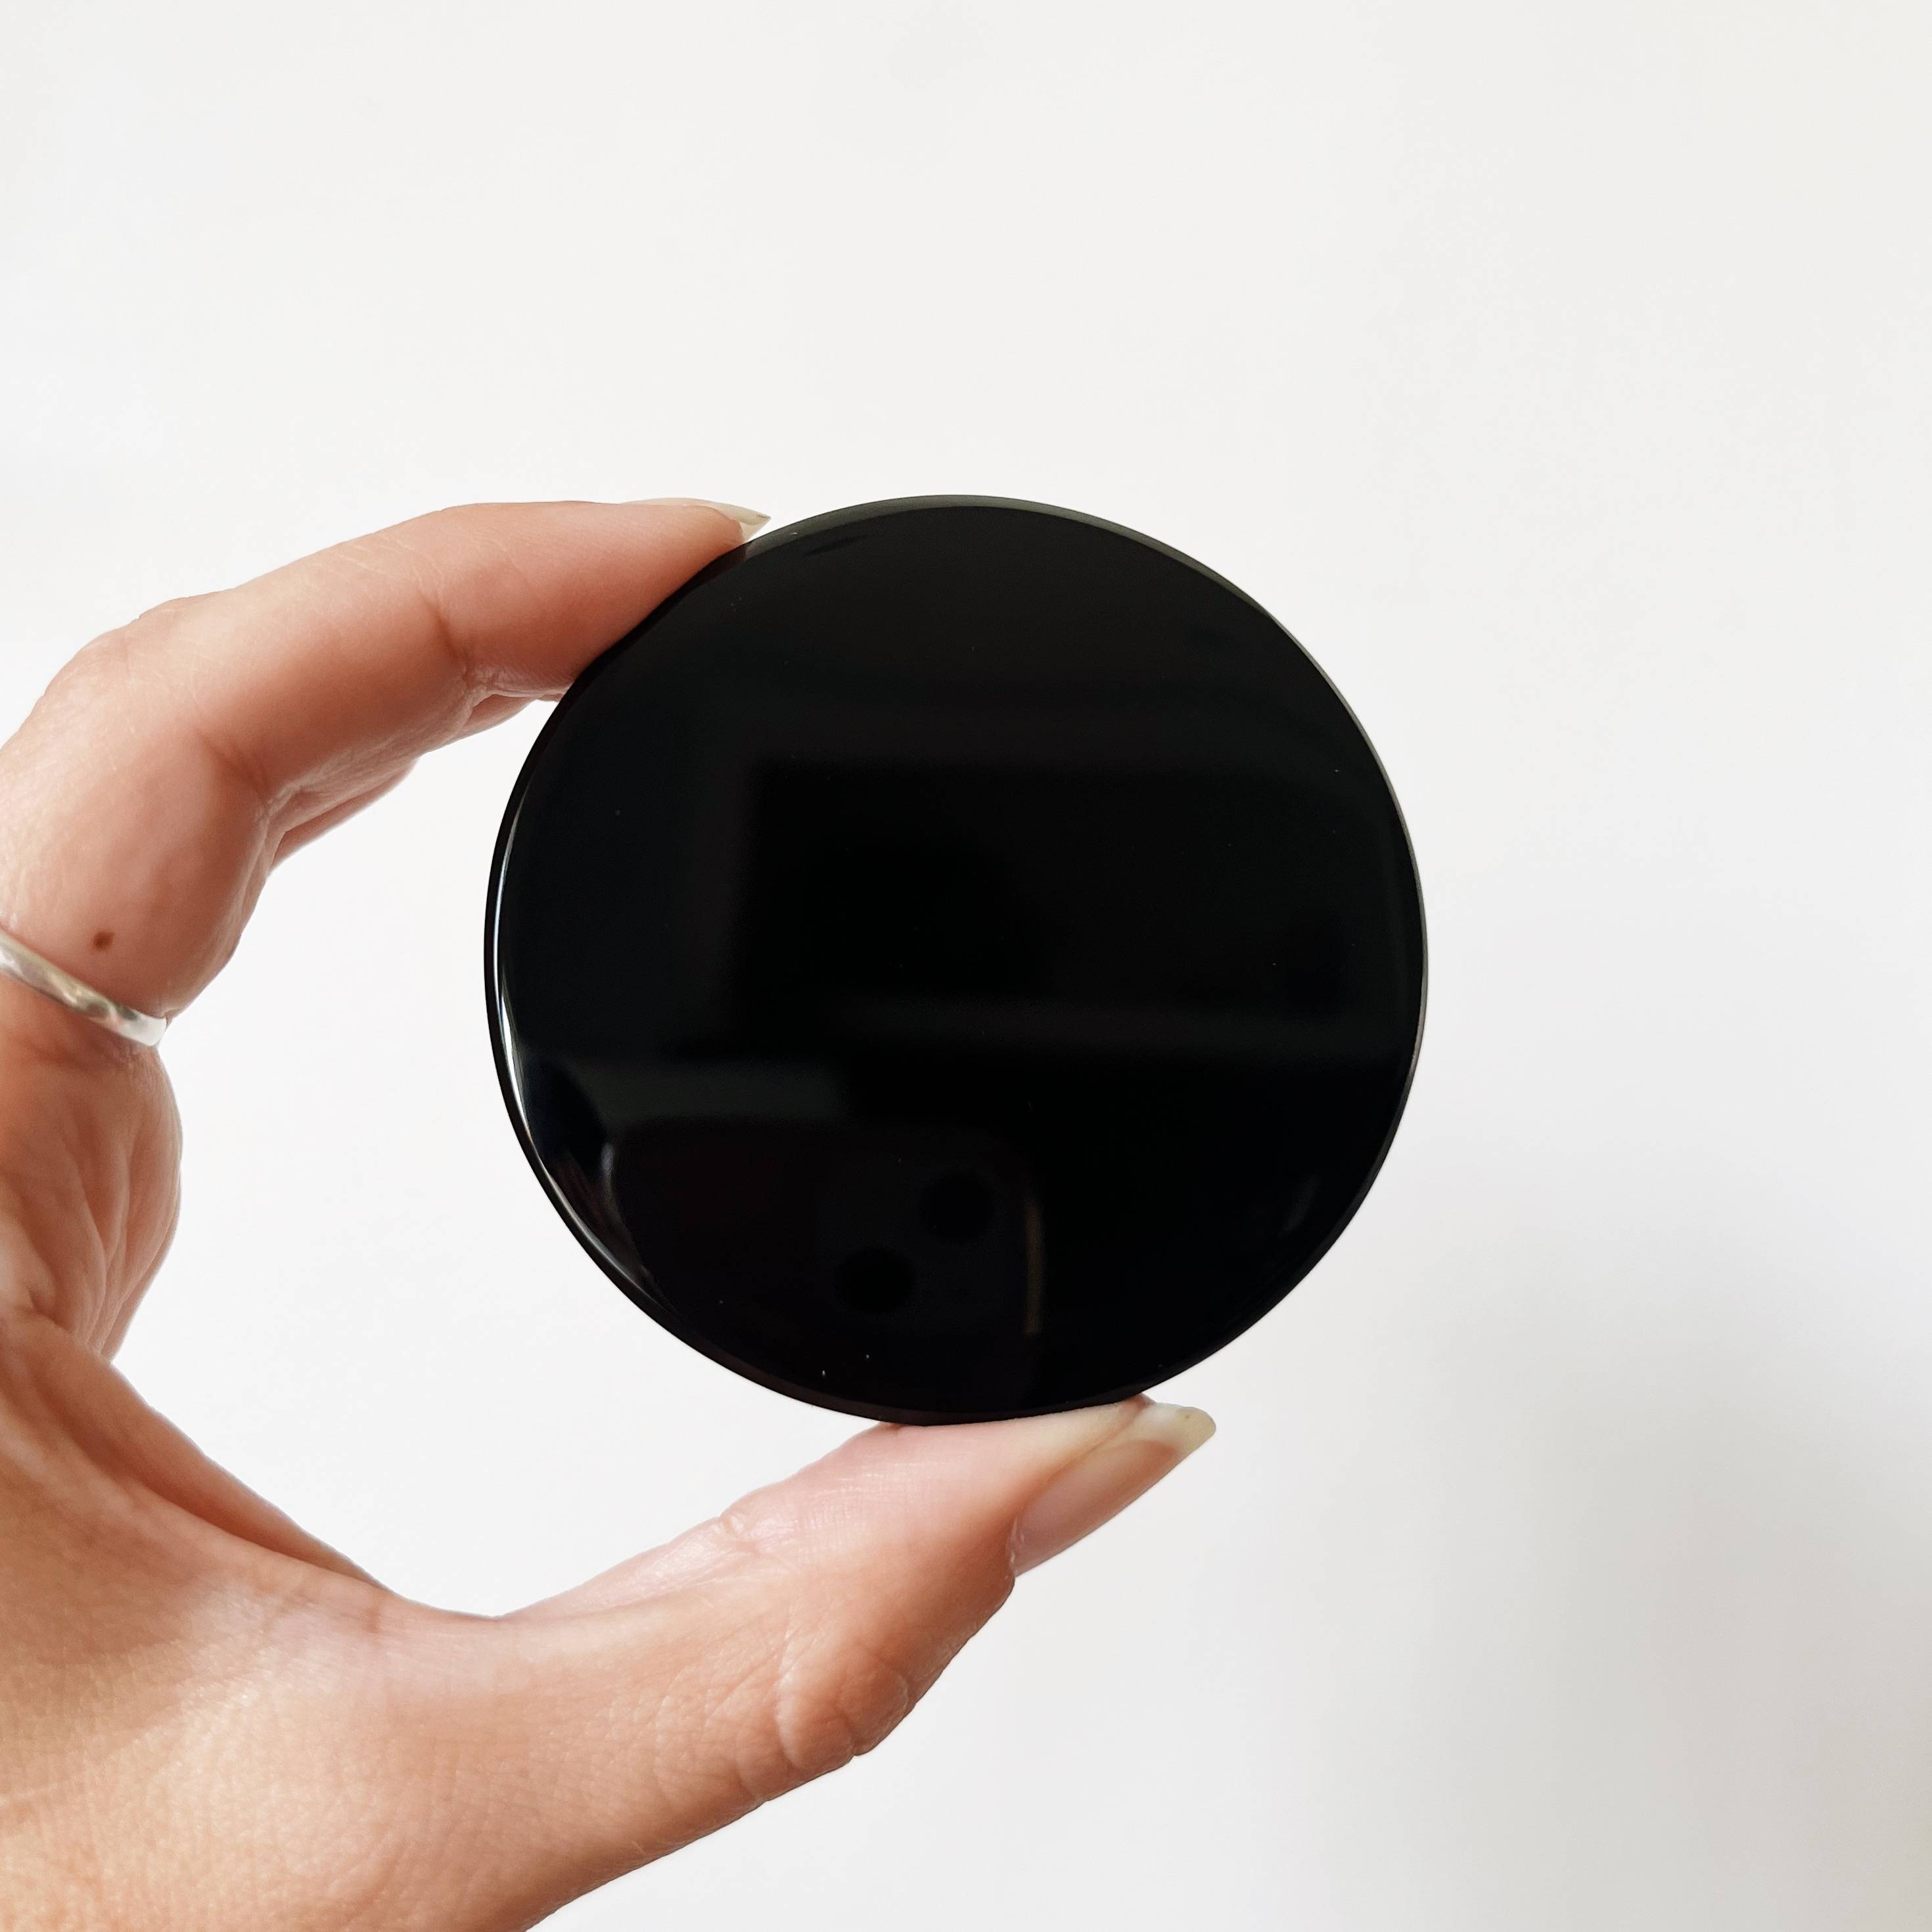 Obsidian Mirrors for Scrying